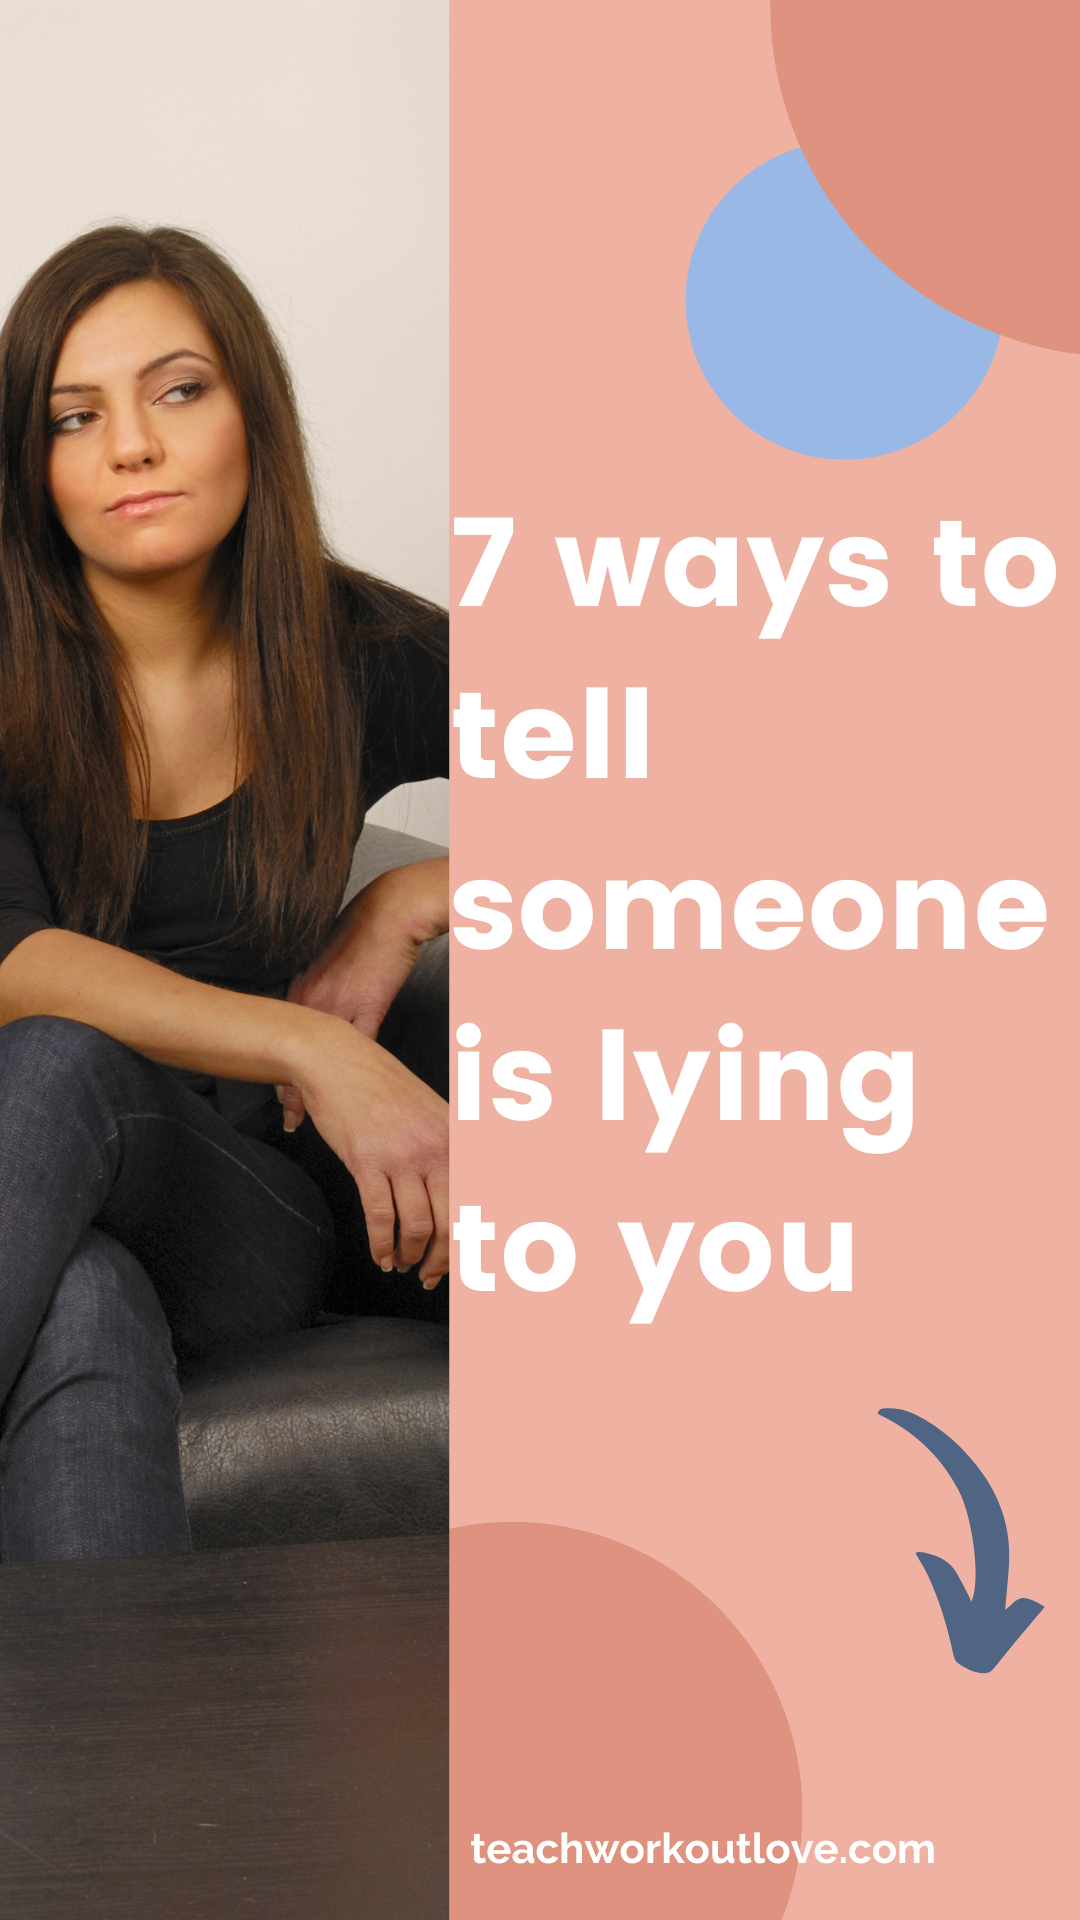 In this blog post, we will discuss the signs of a liar and give you tips on dealing with someone lying to you at work. Stay tuned!